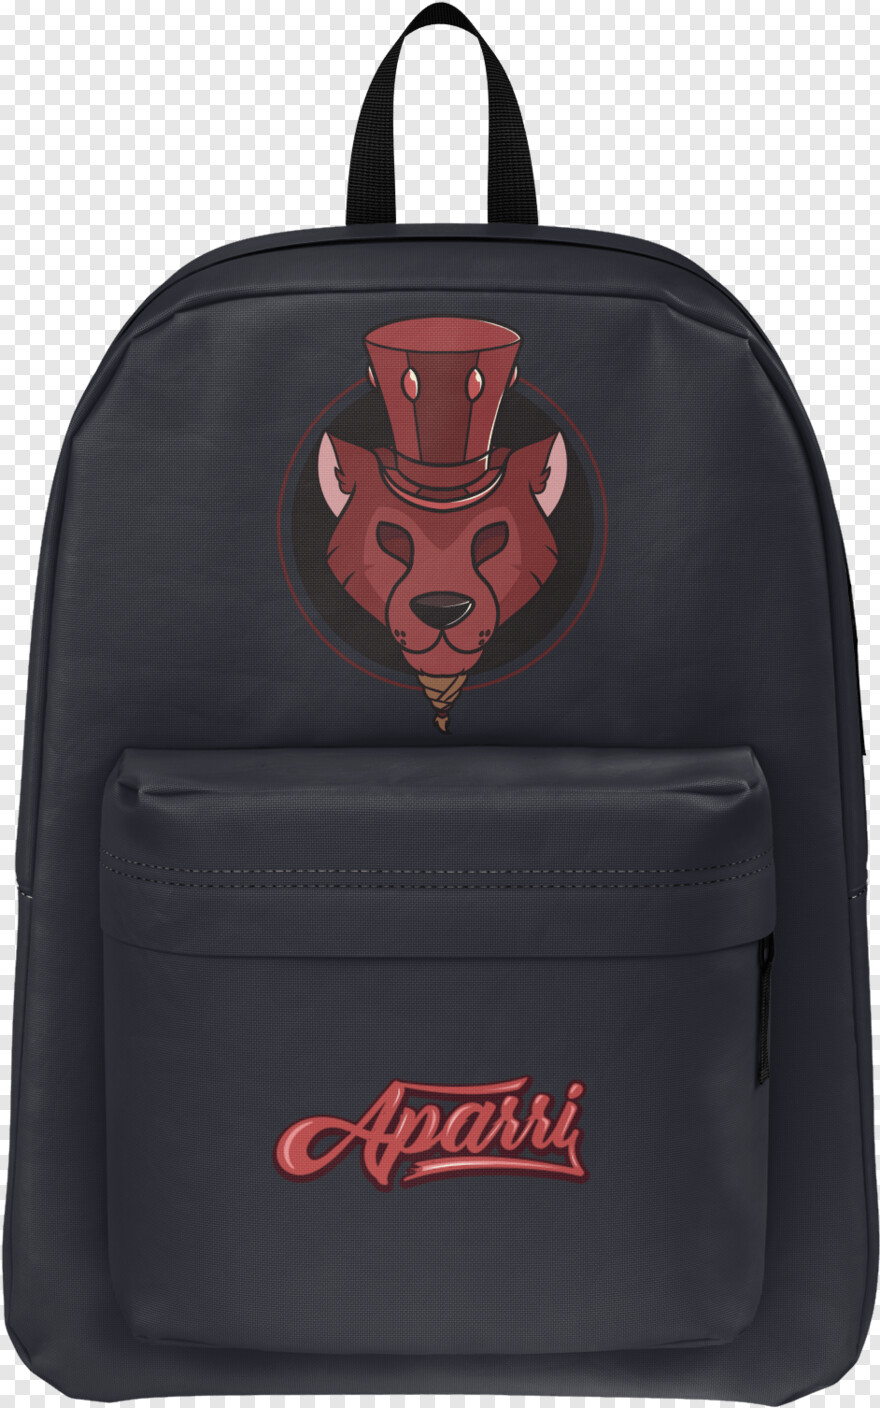 backpack-icon # 426461